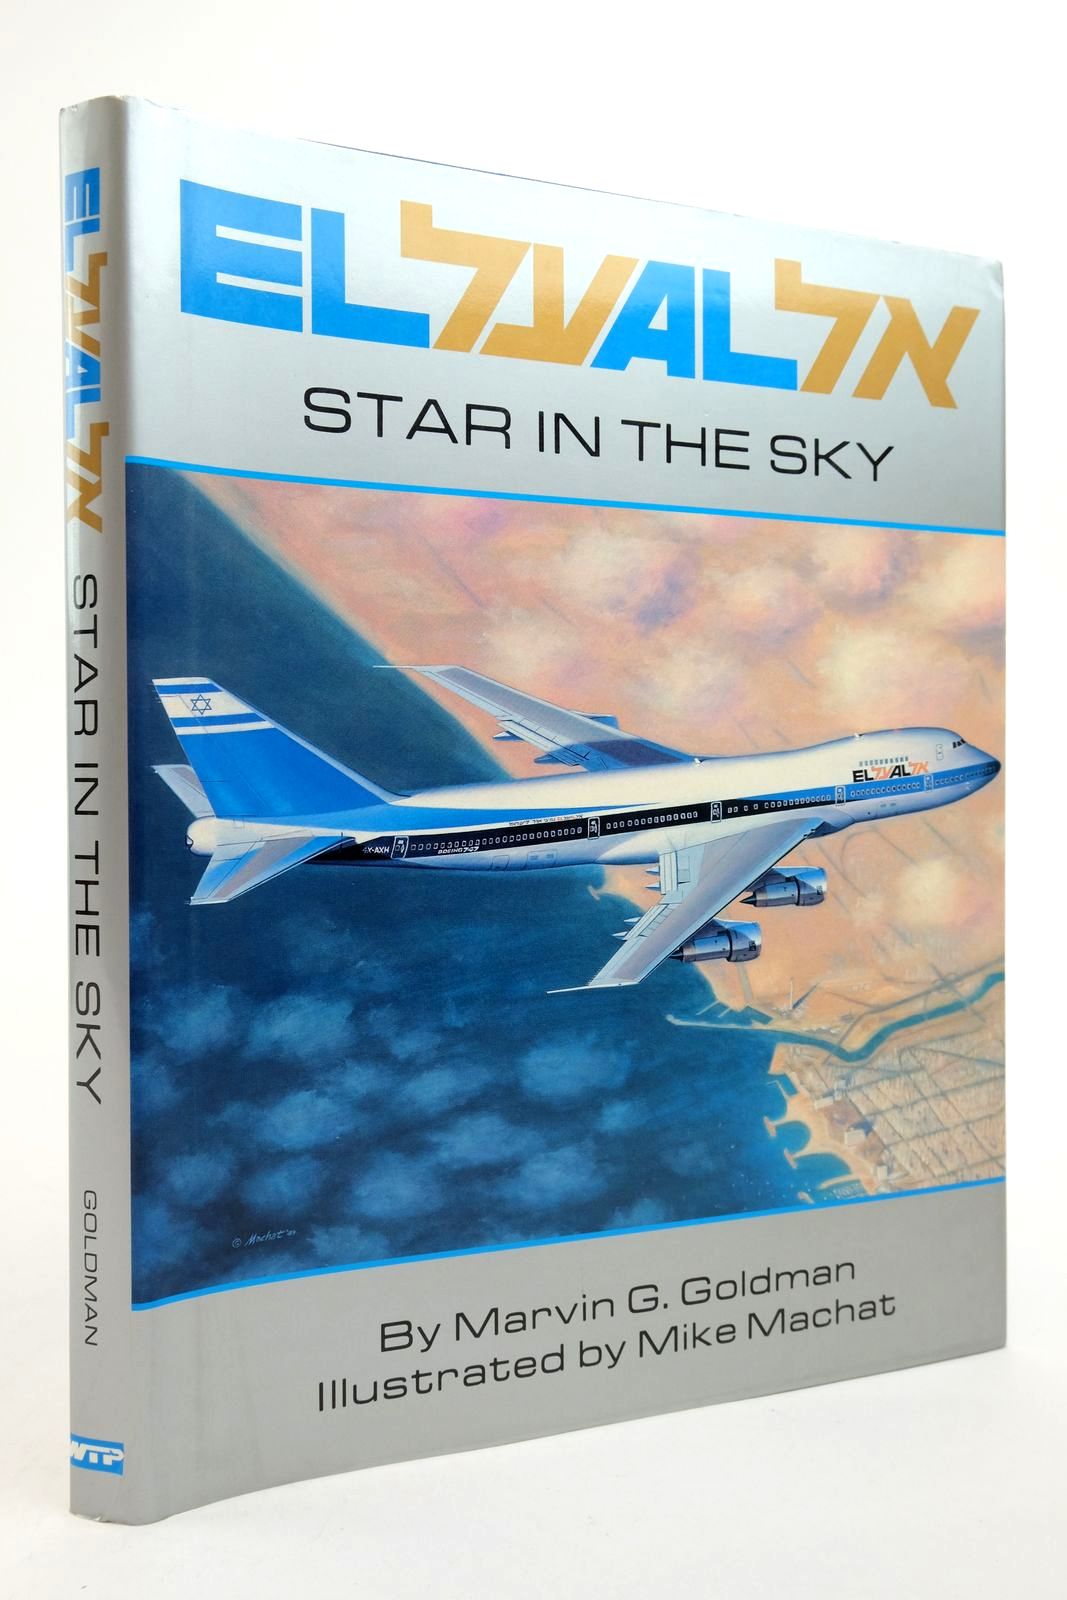 Photo of EL AL STAR IN THE SKY written by Goldman, Marvin G. illustrated by Machat, Mike published by World Transport Press, Inc. (STOCK CODE: 2139361)  for sale by Stella & Rose's Books